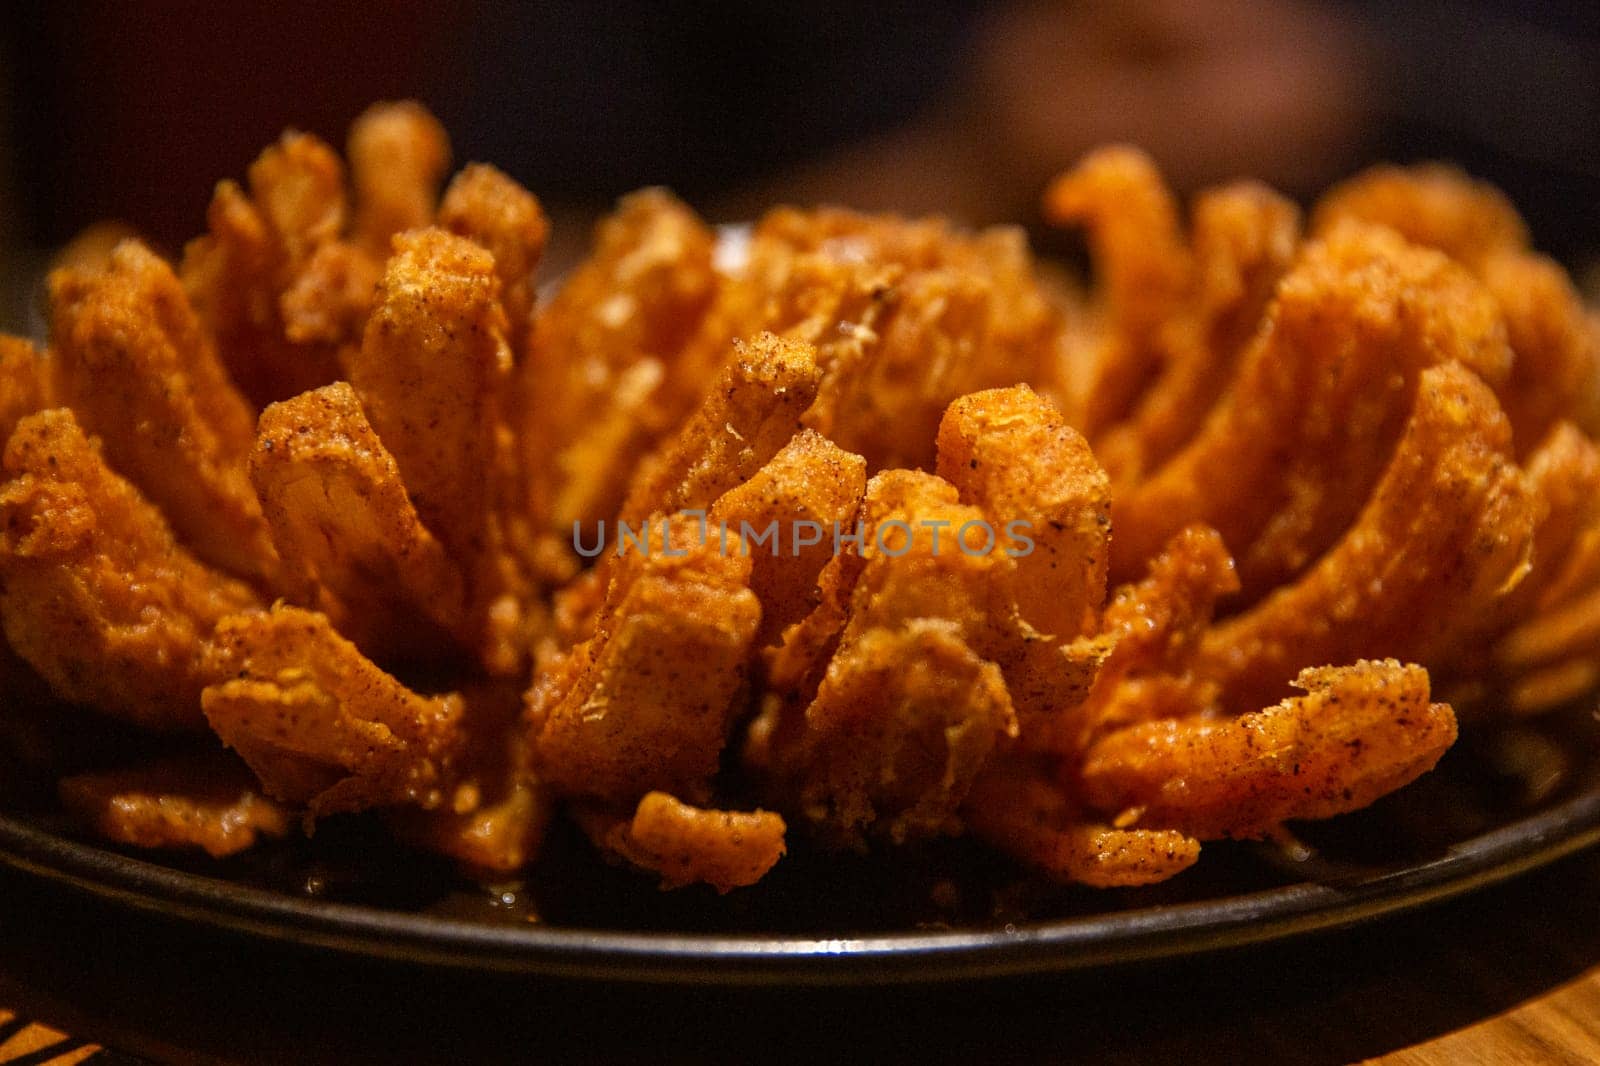 Served Fried Blooming Onion Appetizer by TopCreativePhotography